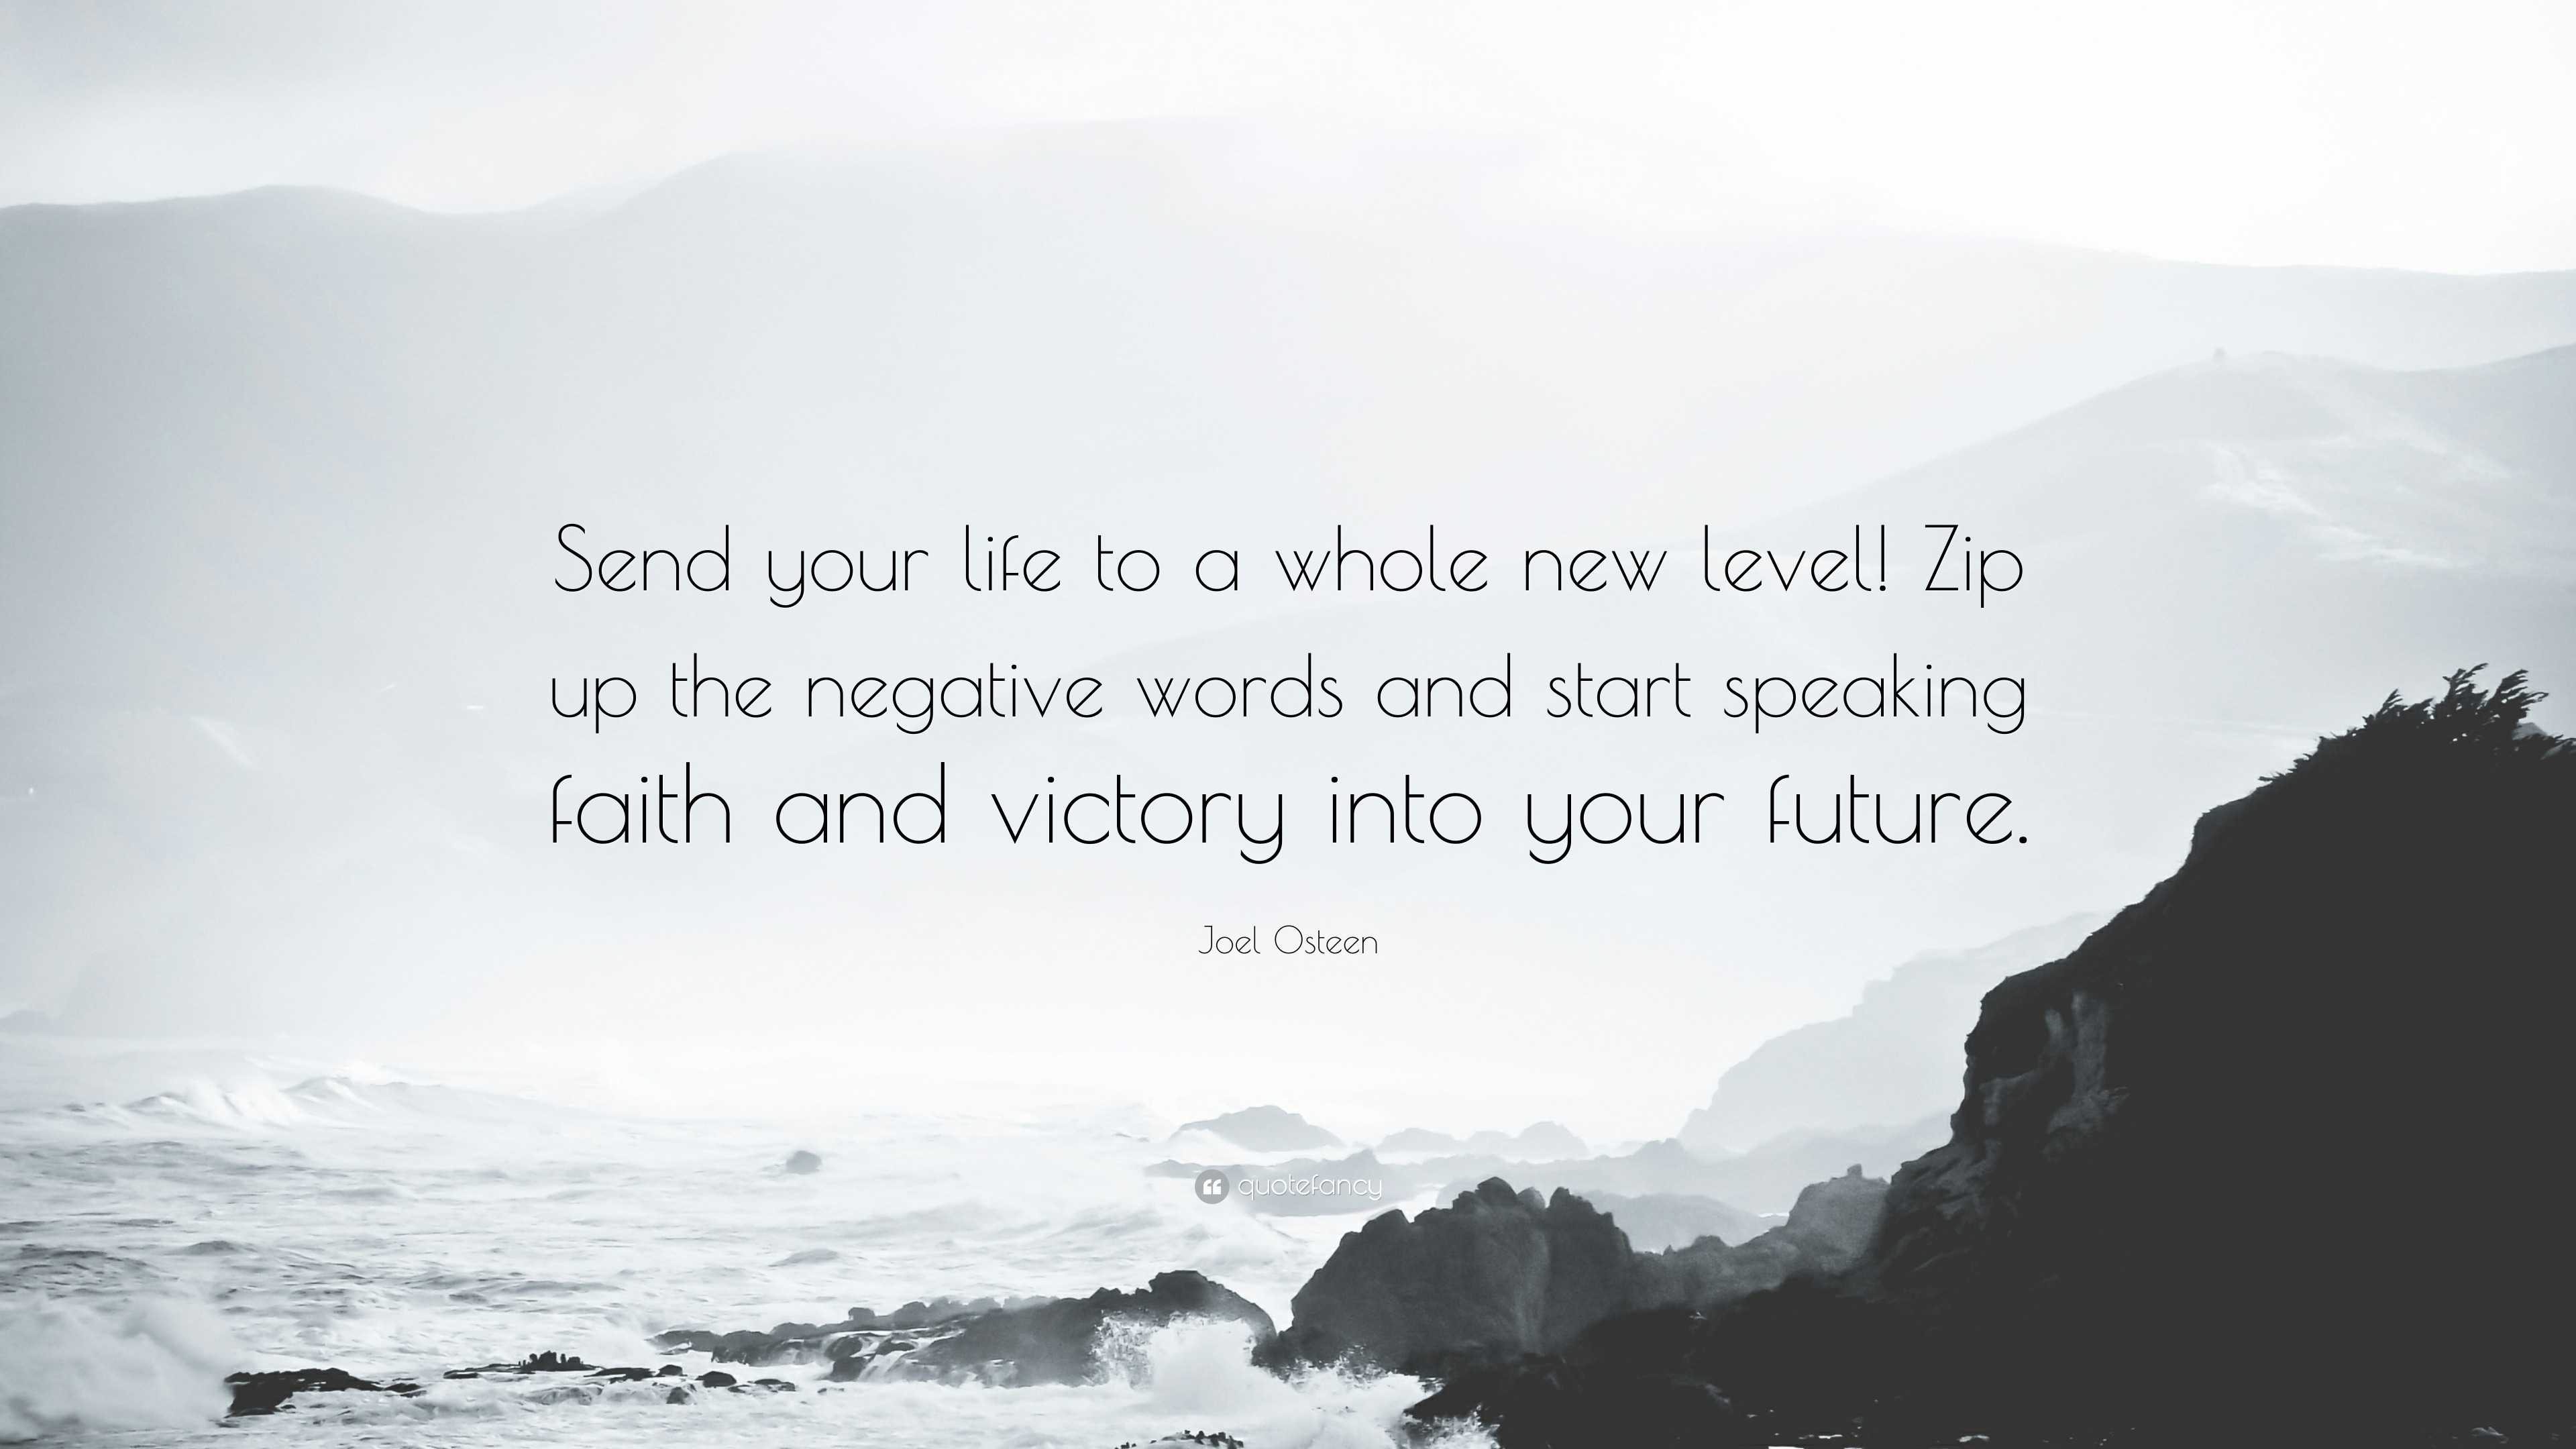 Joel Osteen Quote “Send your life to a whole new level Zip up